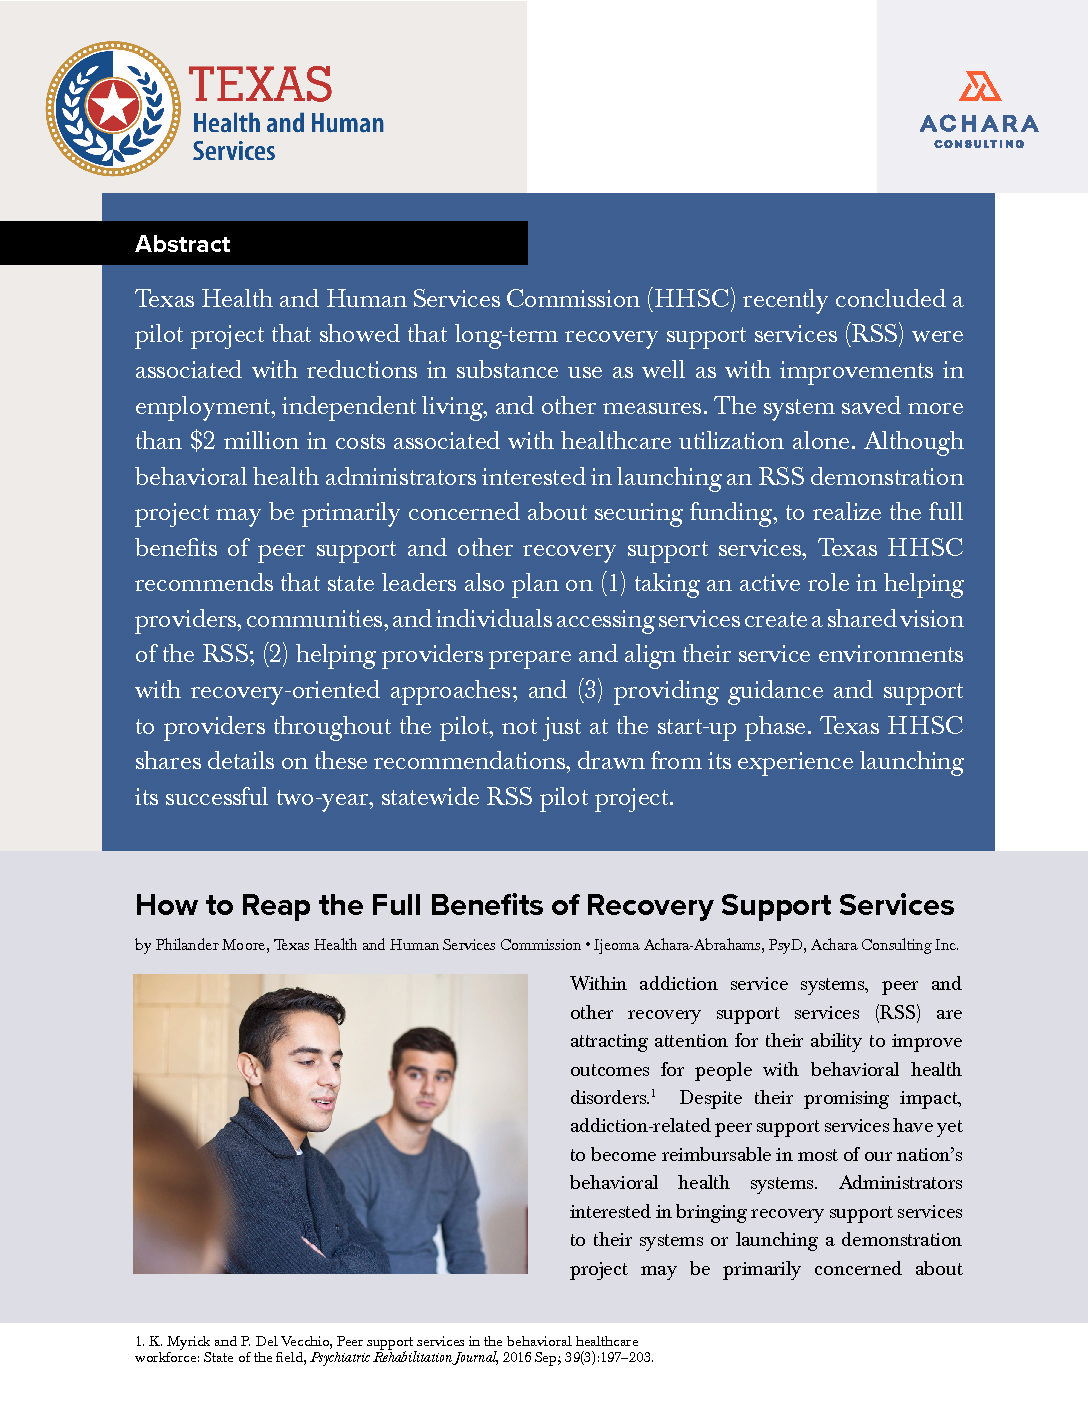 Reap the Full Benefits of Recovery Support Services graphic